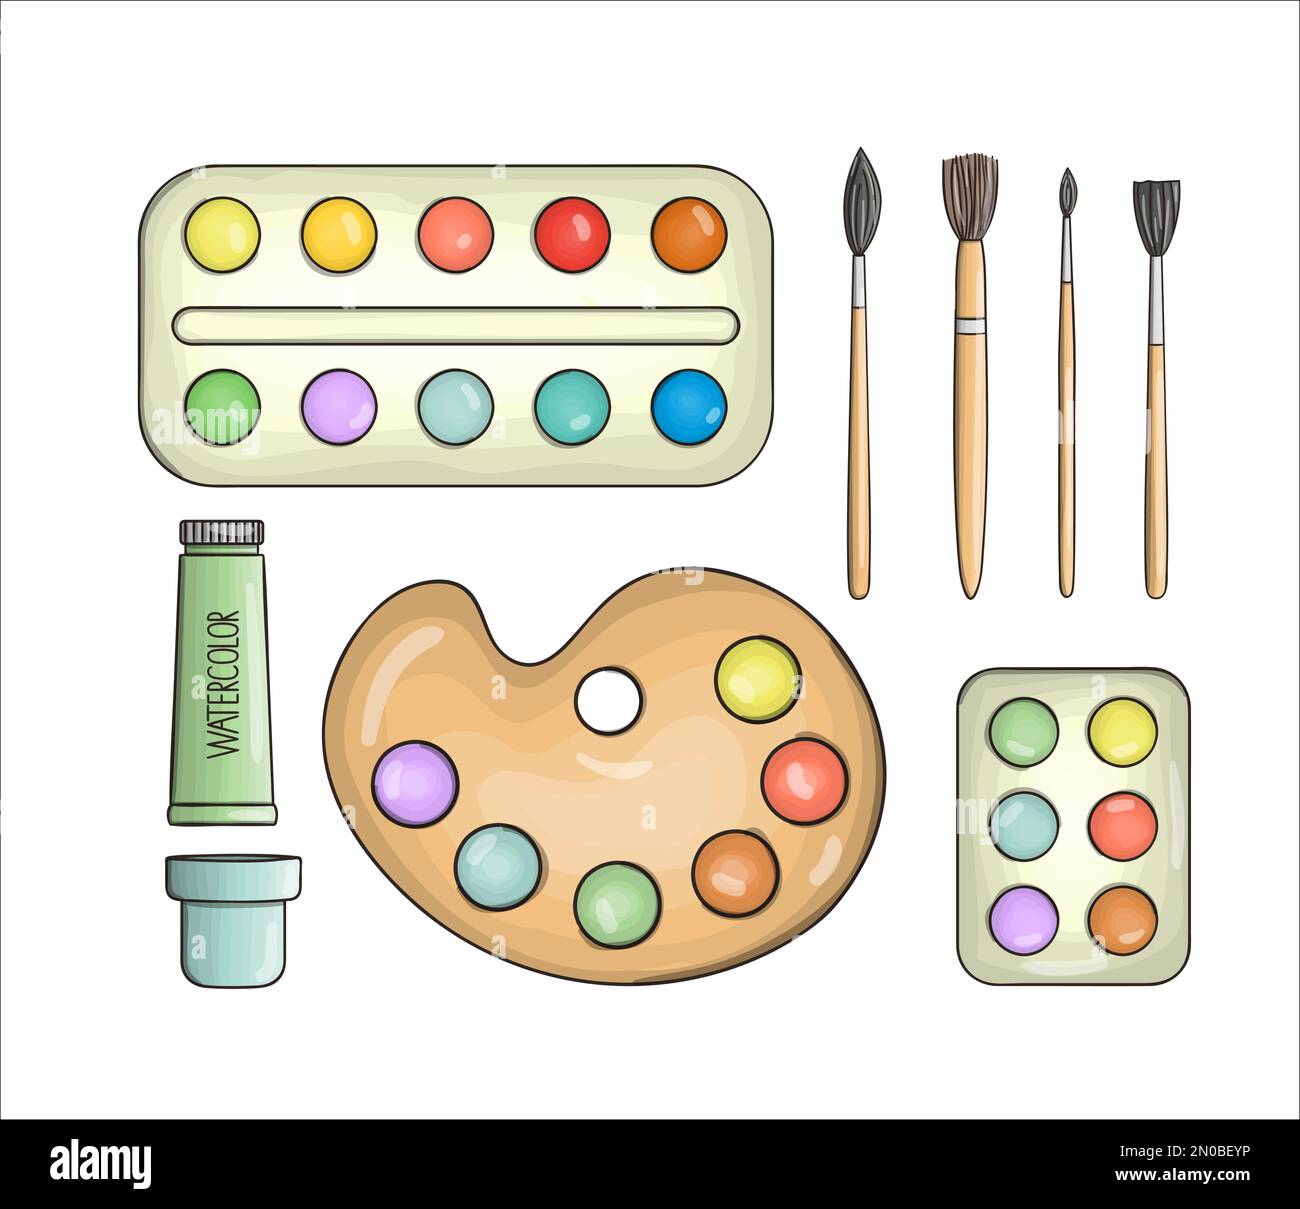 Drawing And Painting Icons Set Brushes And Painting Related Logo